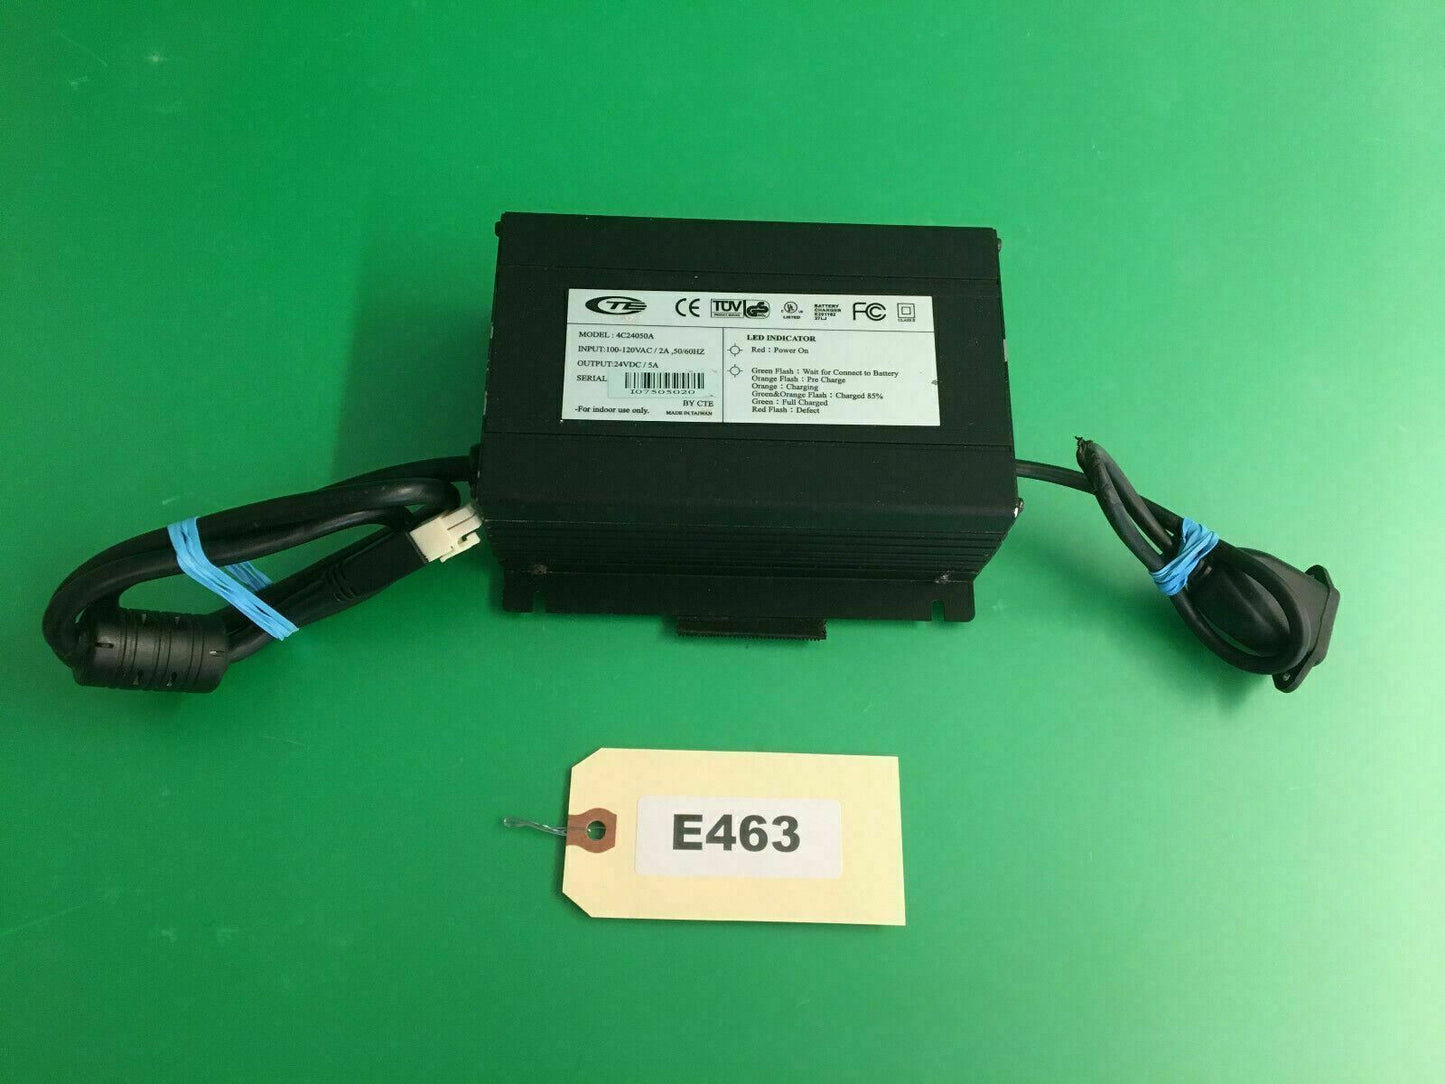 24 Volt 5 Amp On-Board Battery Charger for Invacare Pronto M91 4C24050A #E463